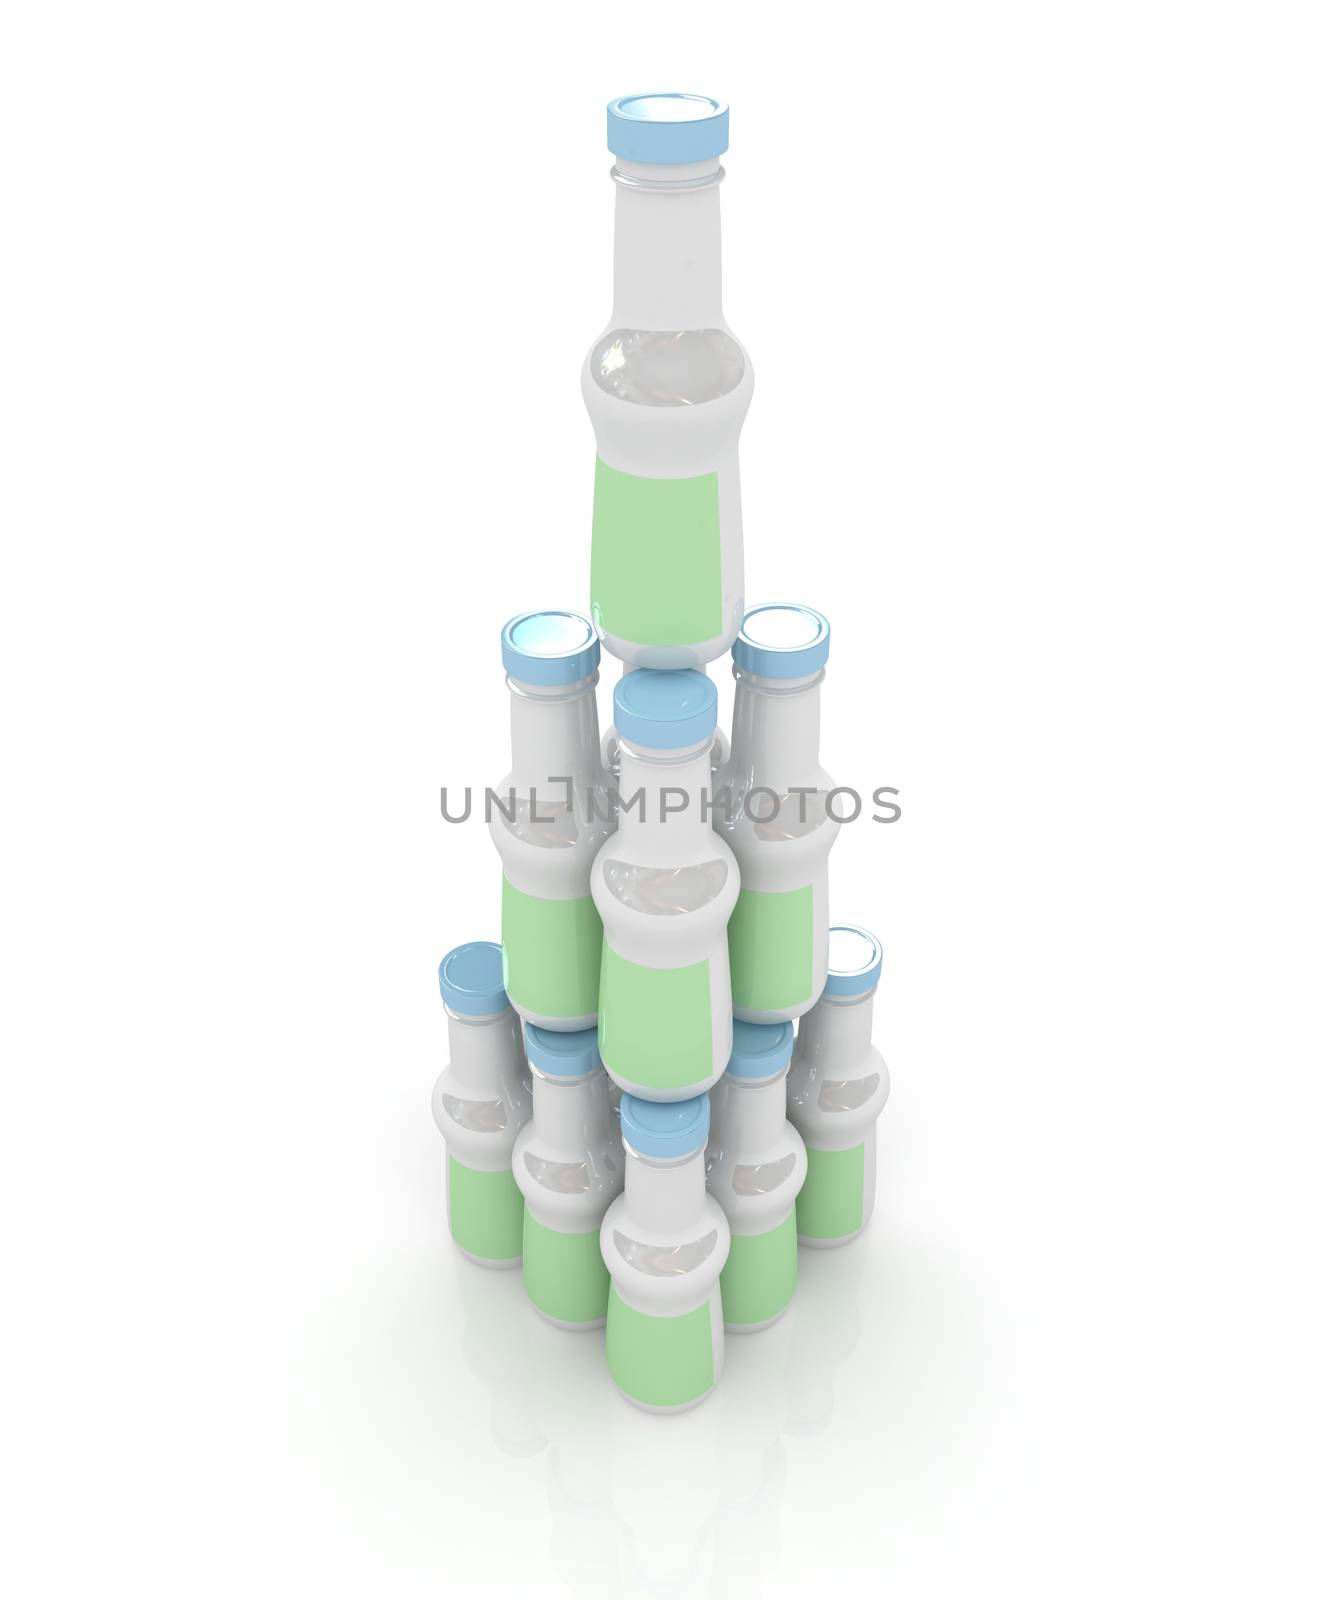 Plastic milk products bottles set on a white background